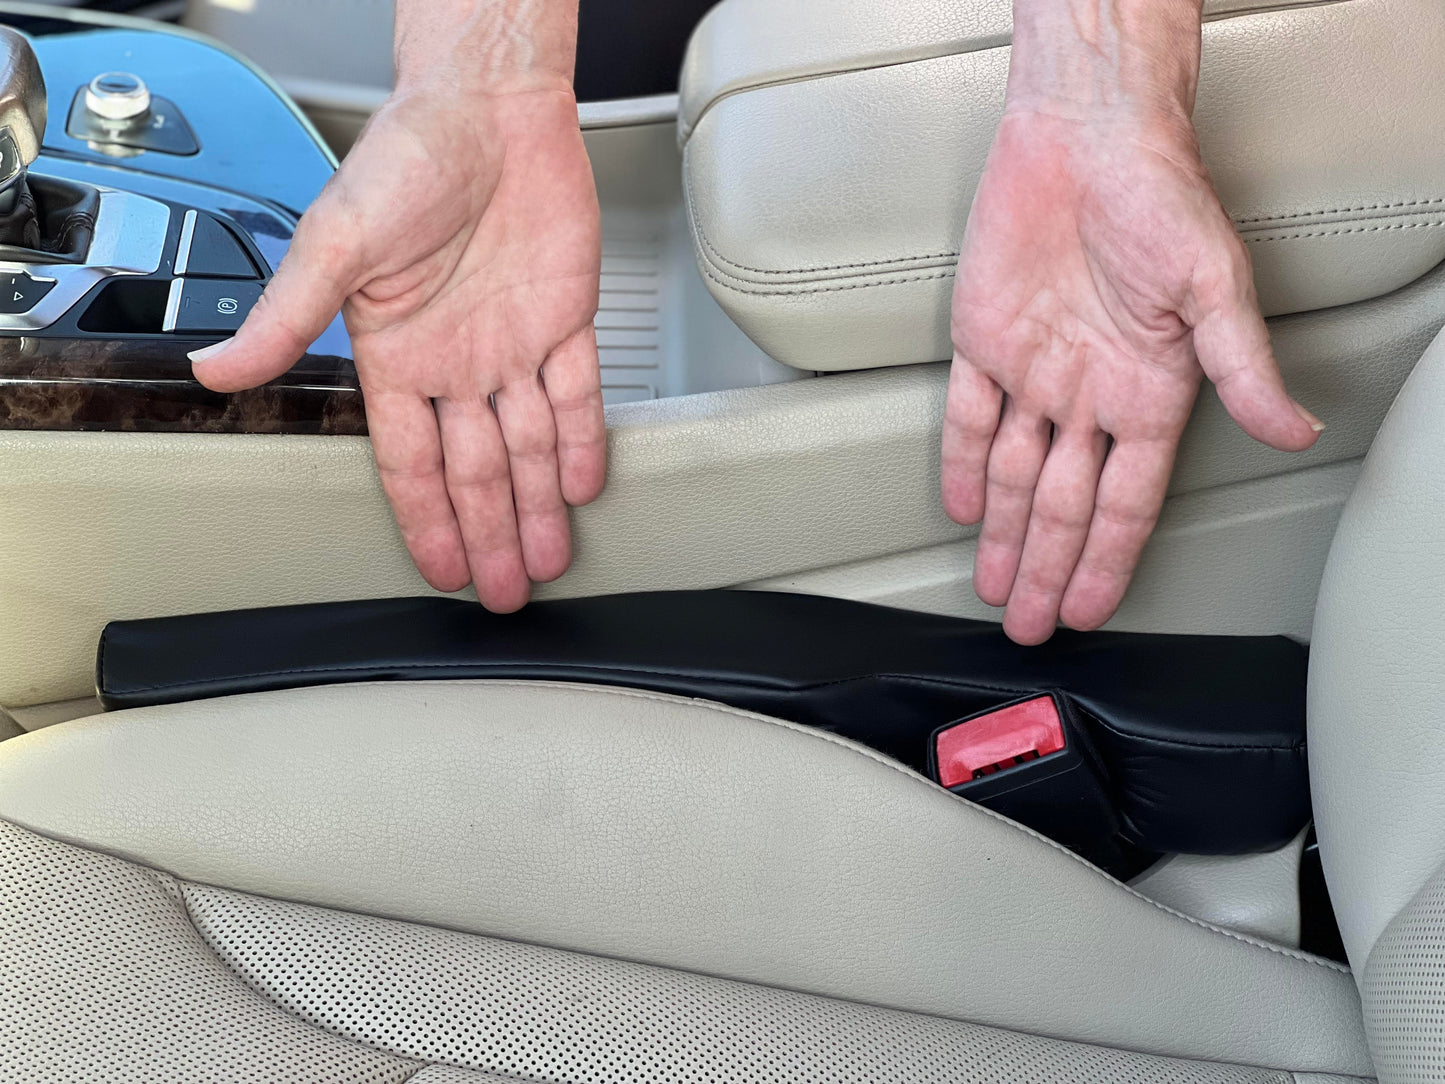 GAP GUARD - Car Seat Gap Filler - Fill The Gap Between The Seat and Center Console - Secure Universal Fit Driver and Passanger Side - Set of 2 (Automotive Leather)